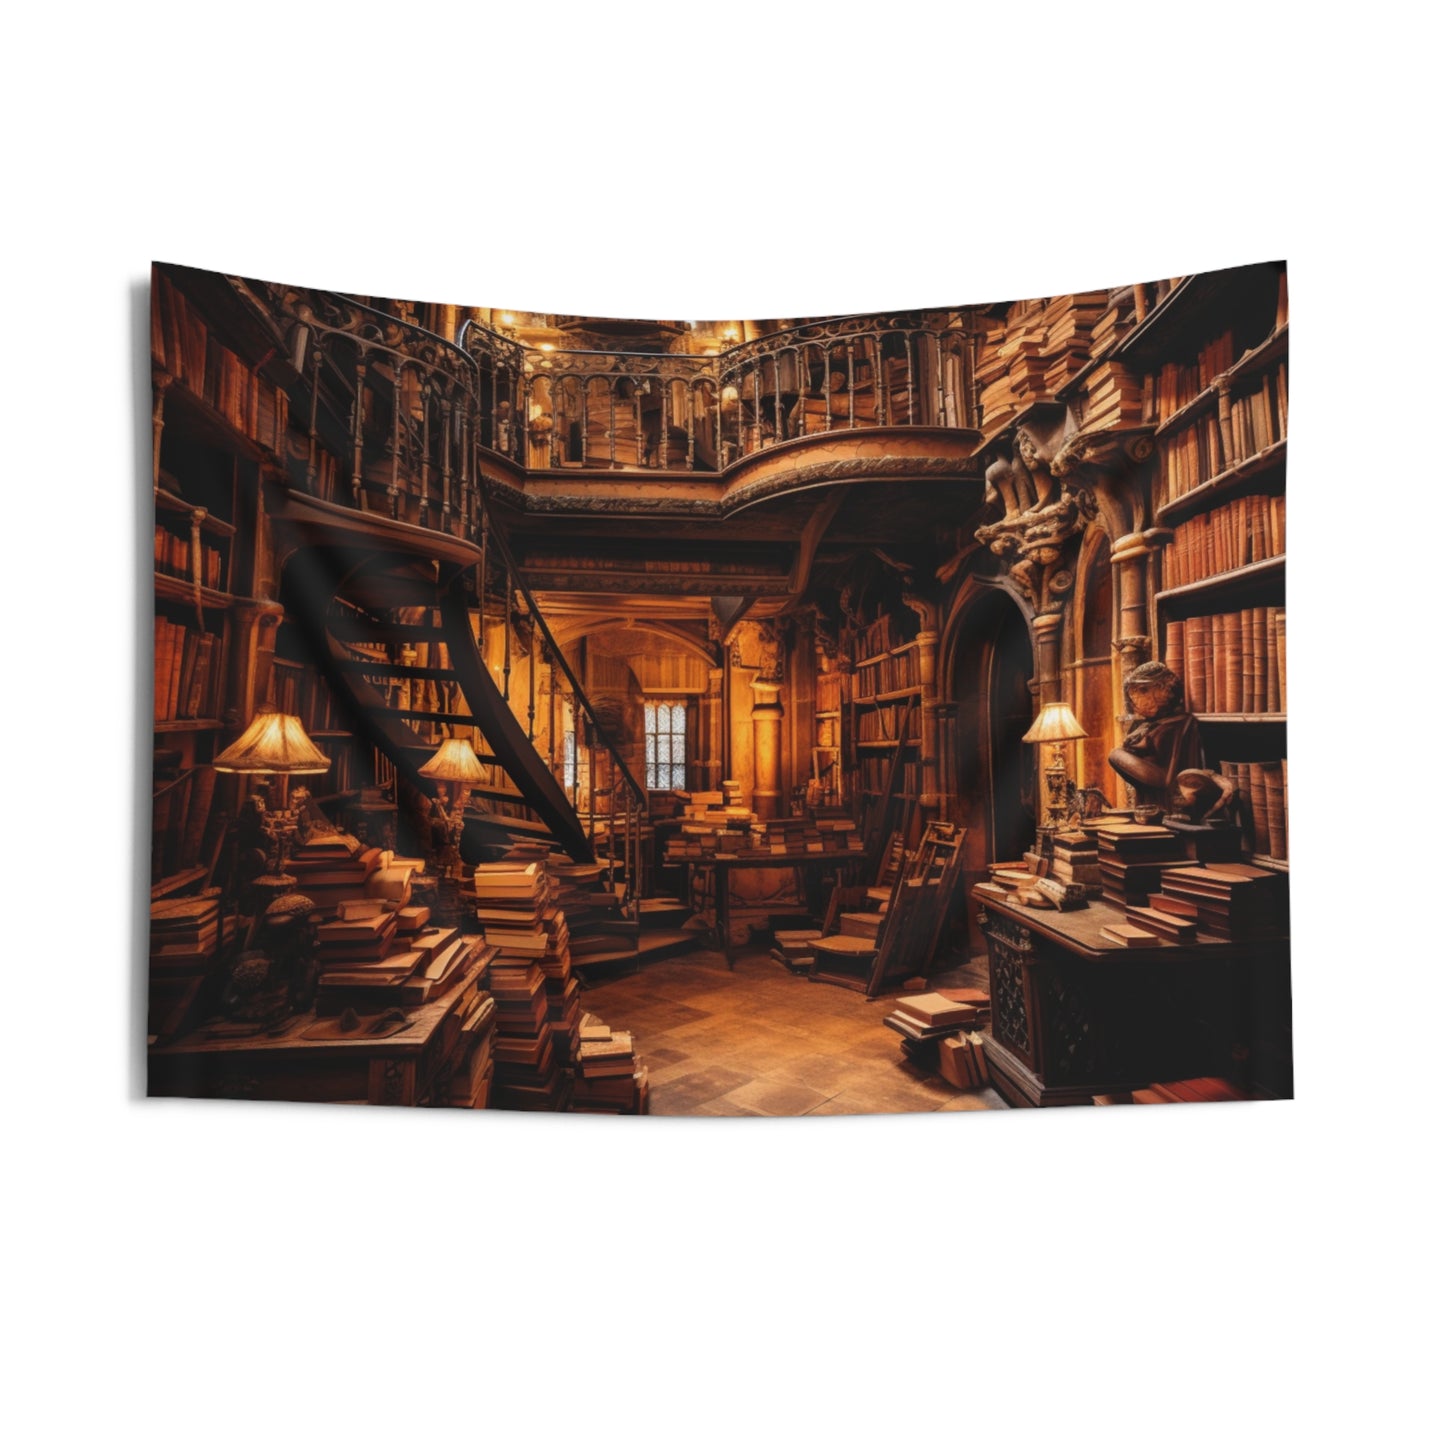 Vintage Library Tapestry, Retro Books Wall Art Hanging Cool Unique Landscape Aesthetic Large Small Decor Bedroom College Dorm Room Starcove Fashion